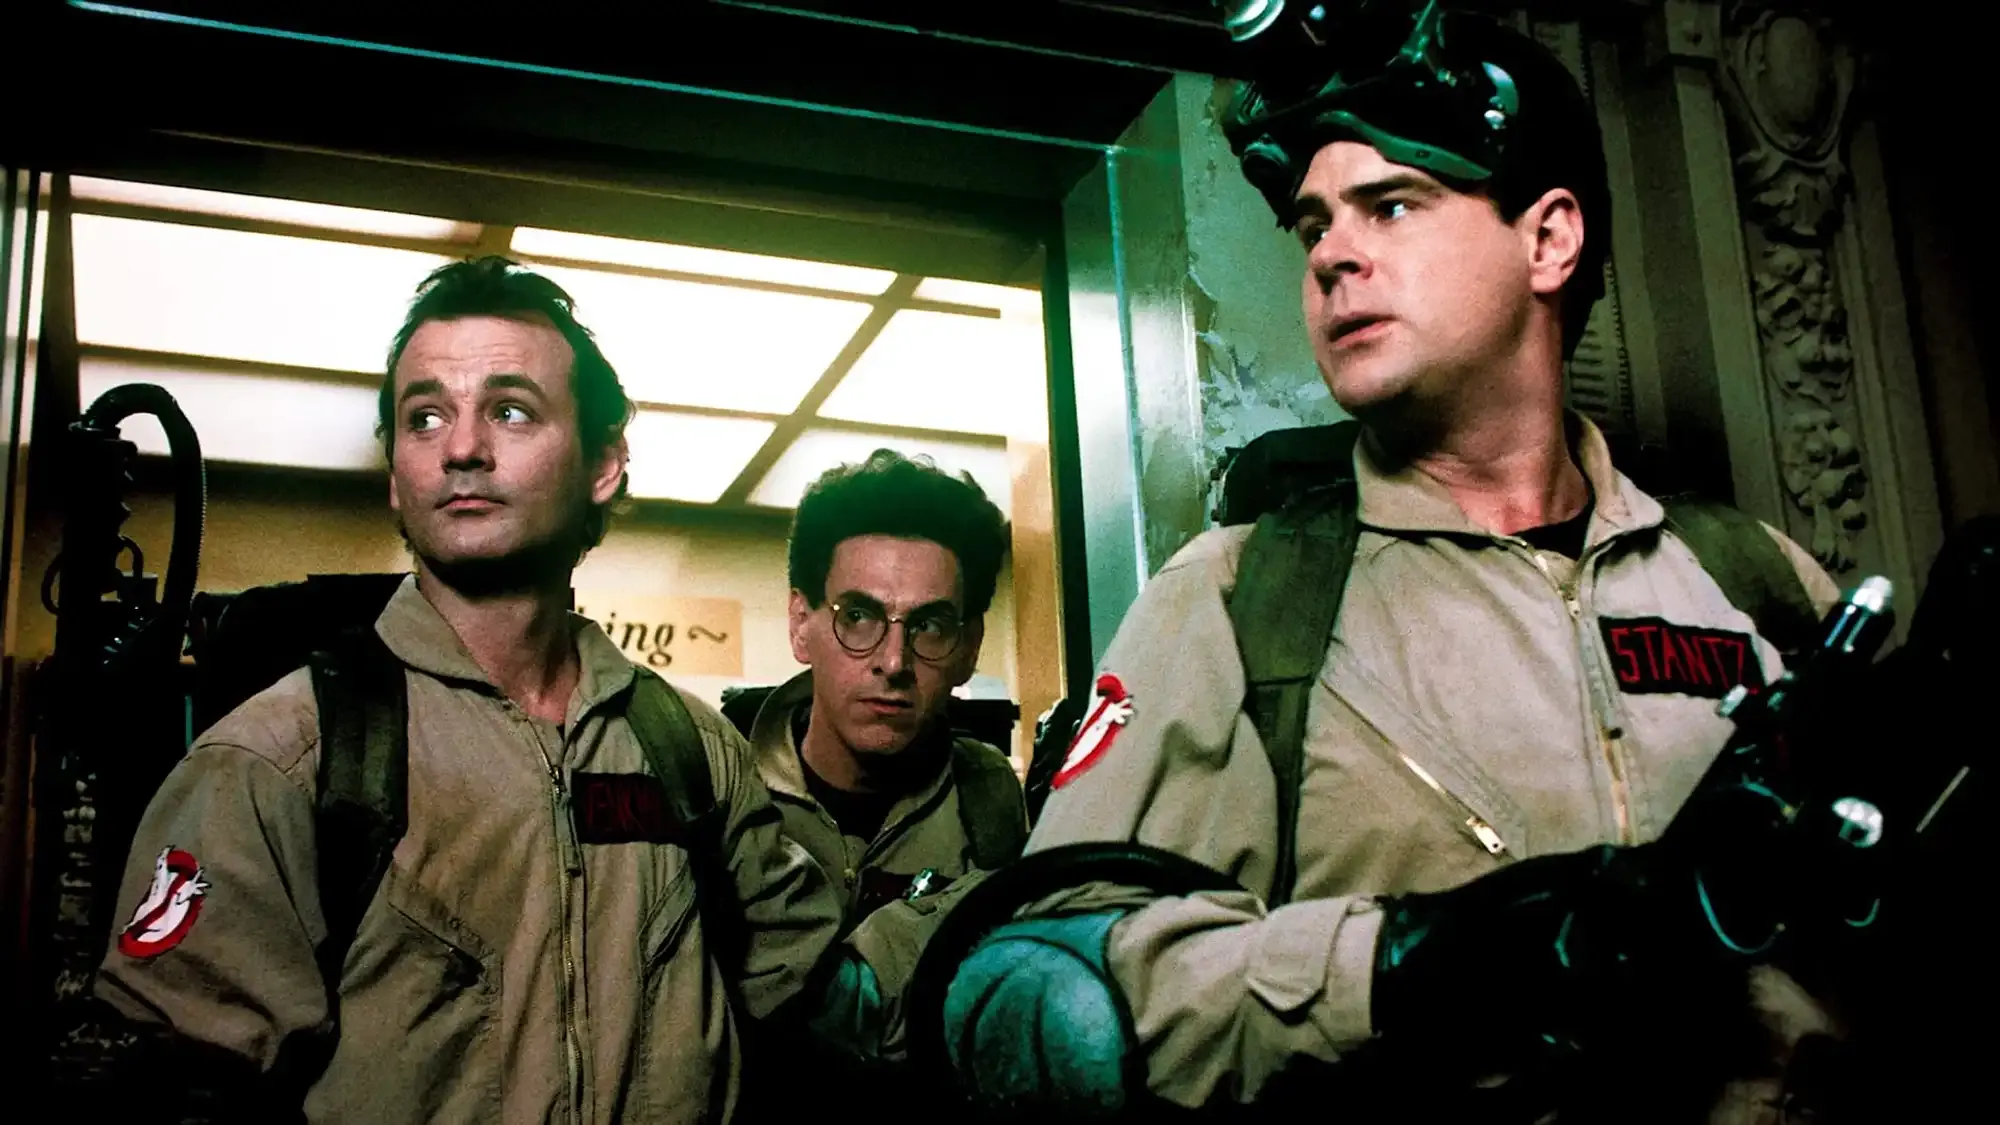 Ghostbusters movie review